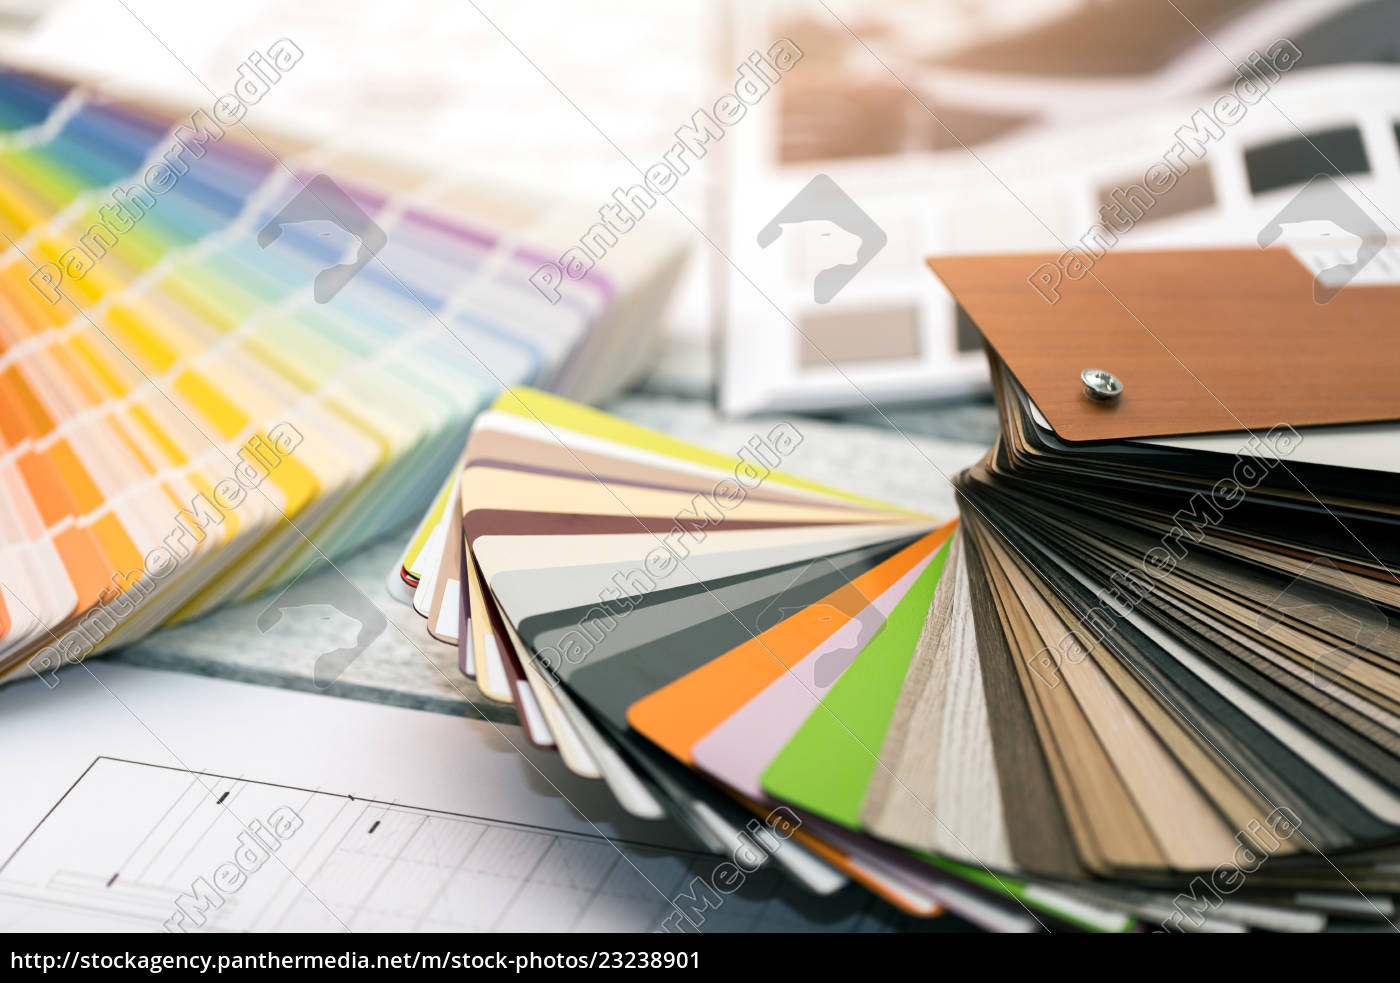 Stock Photo 23238901 Interior Design Paint Color And Furniture Material Samples